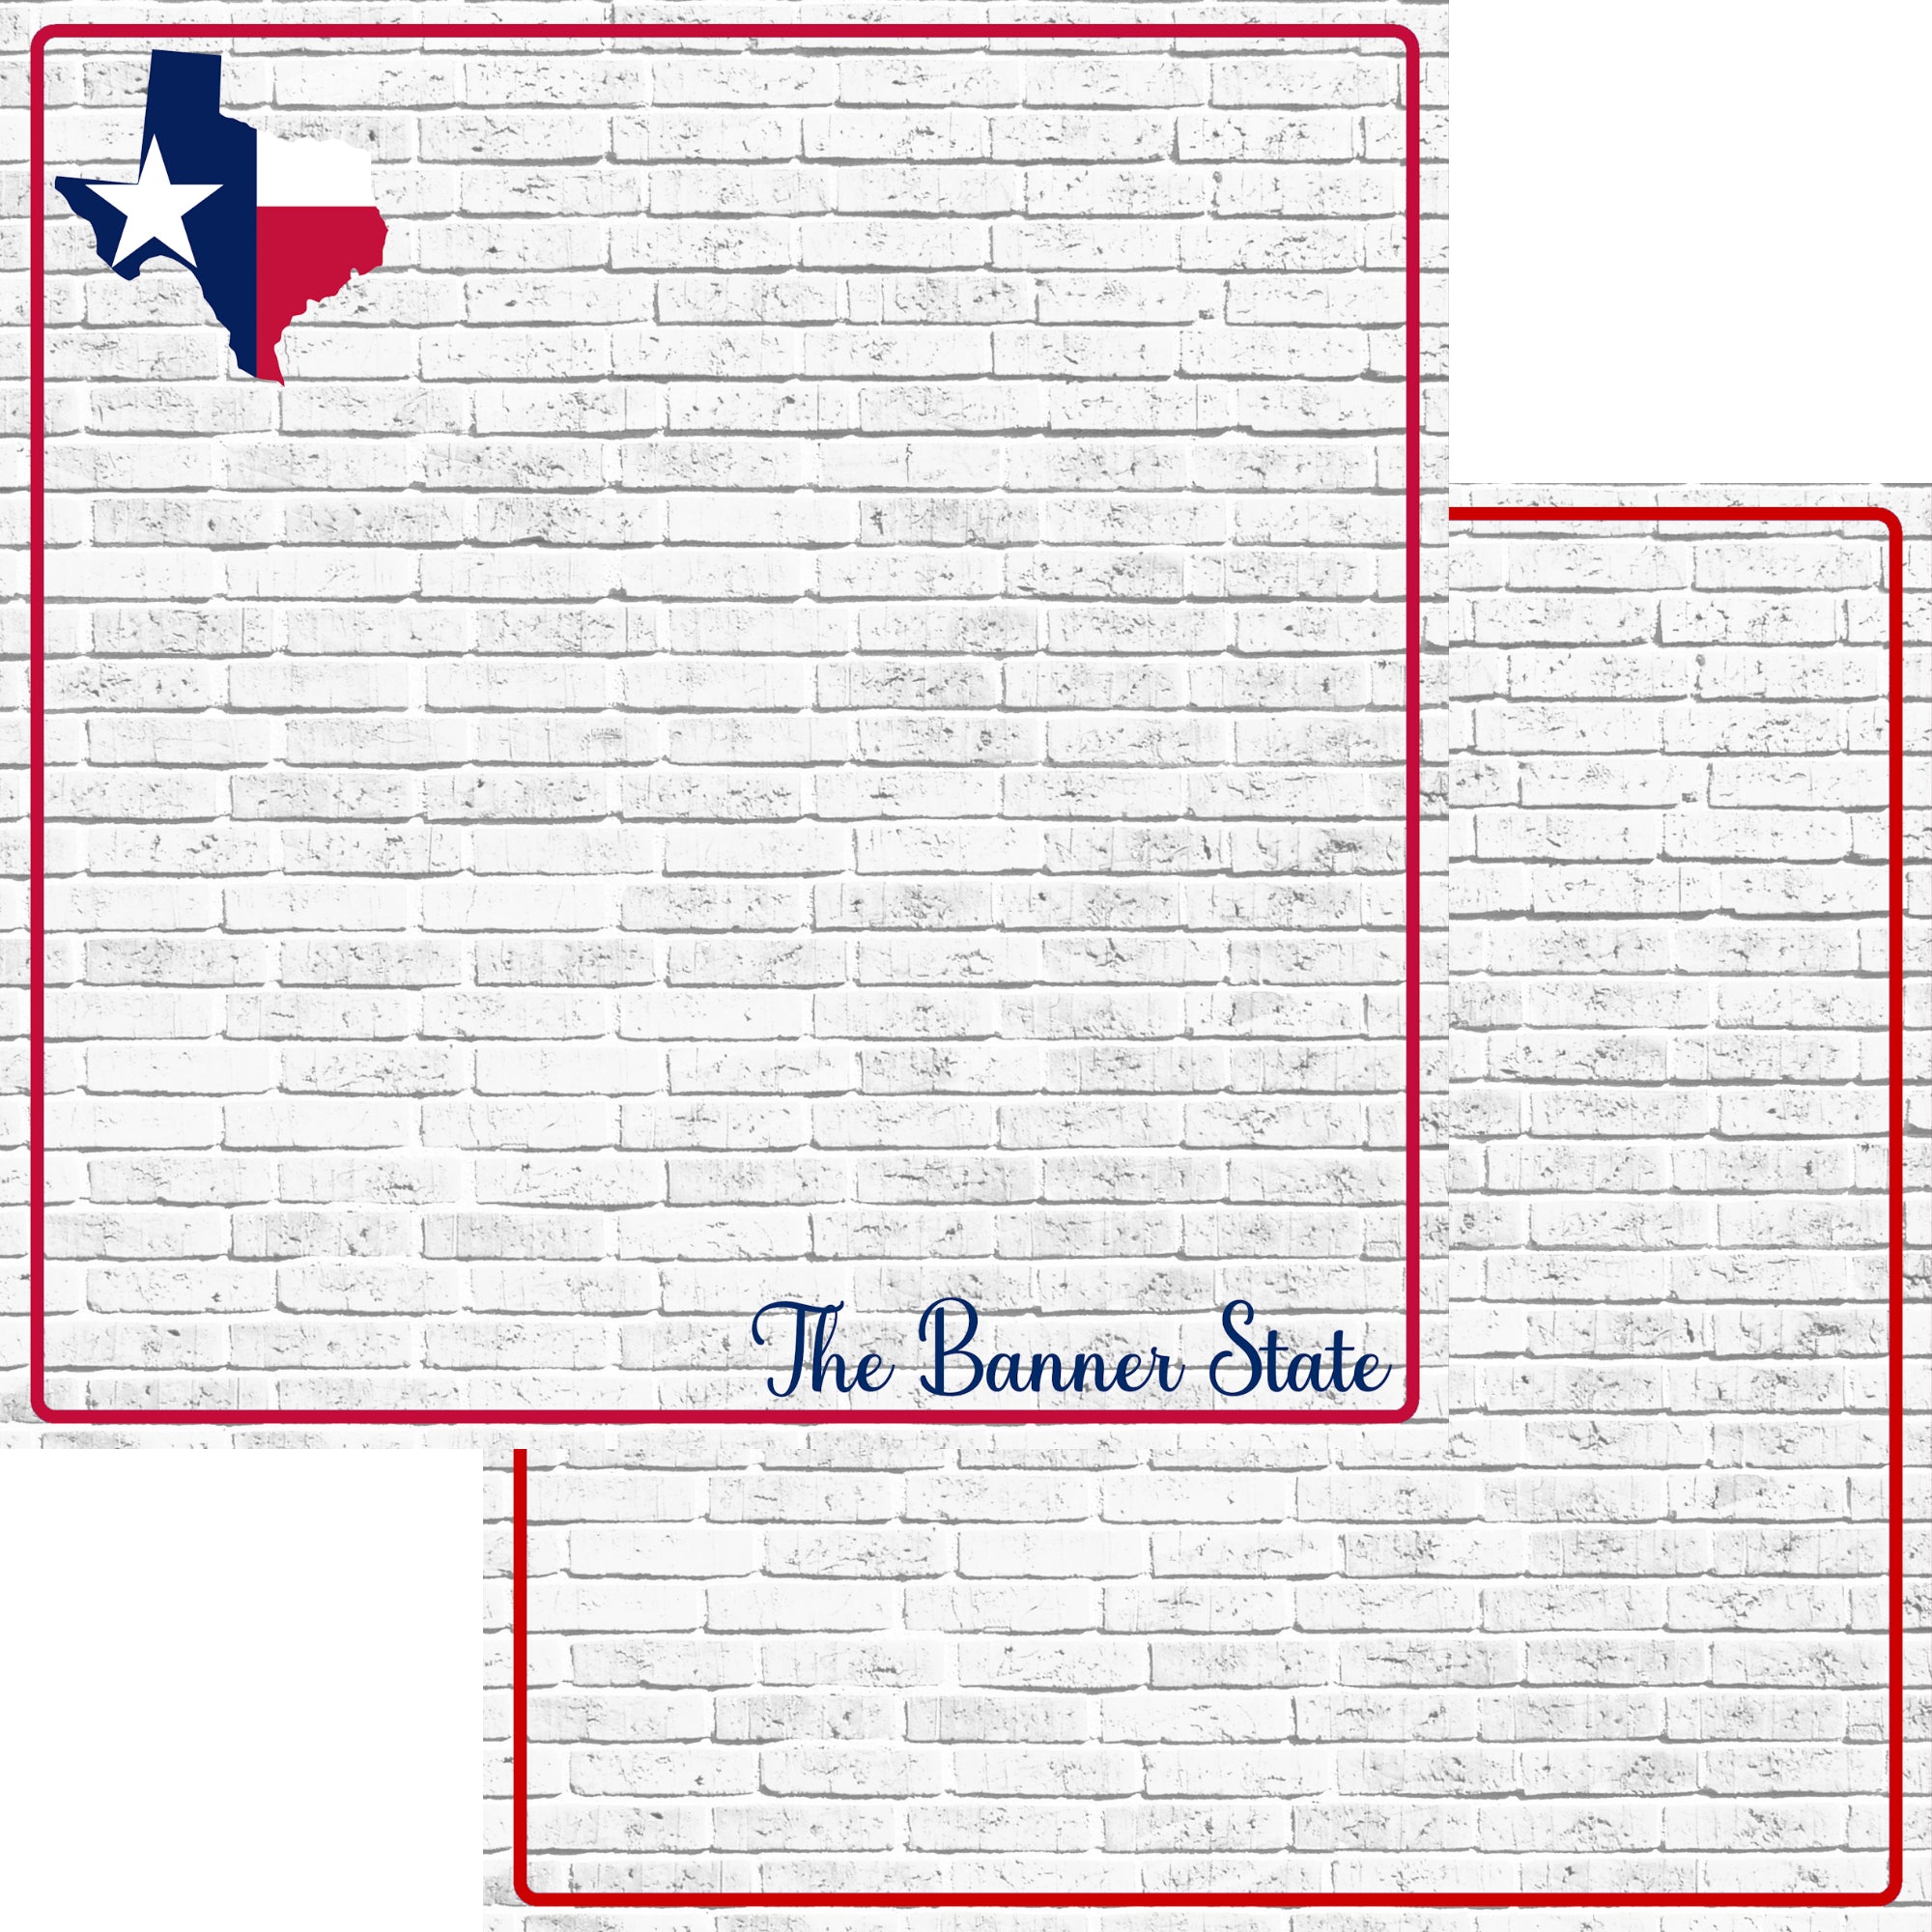 Fifty States Collection Texas 12 x 12 Double-Sided Scrapbook Paper by SSC Designs